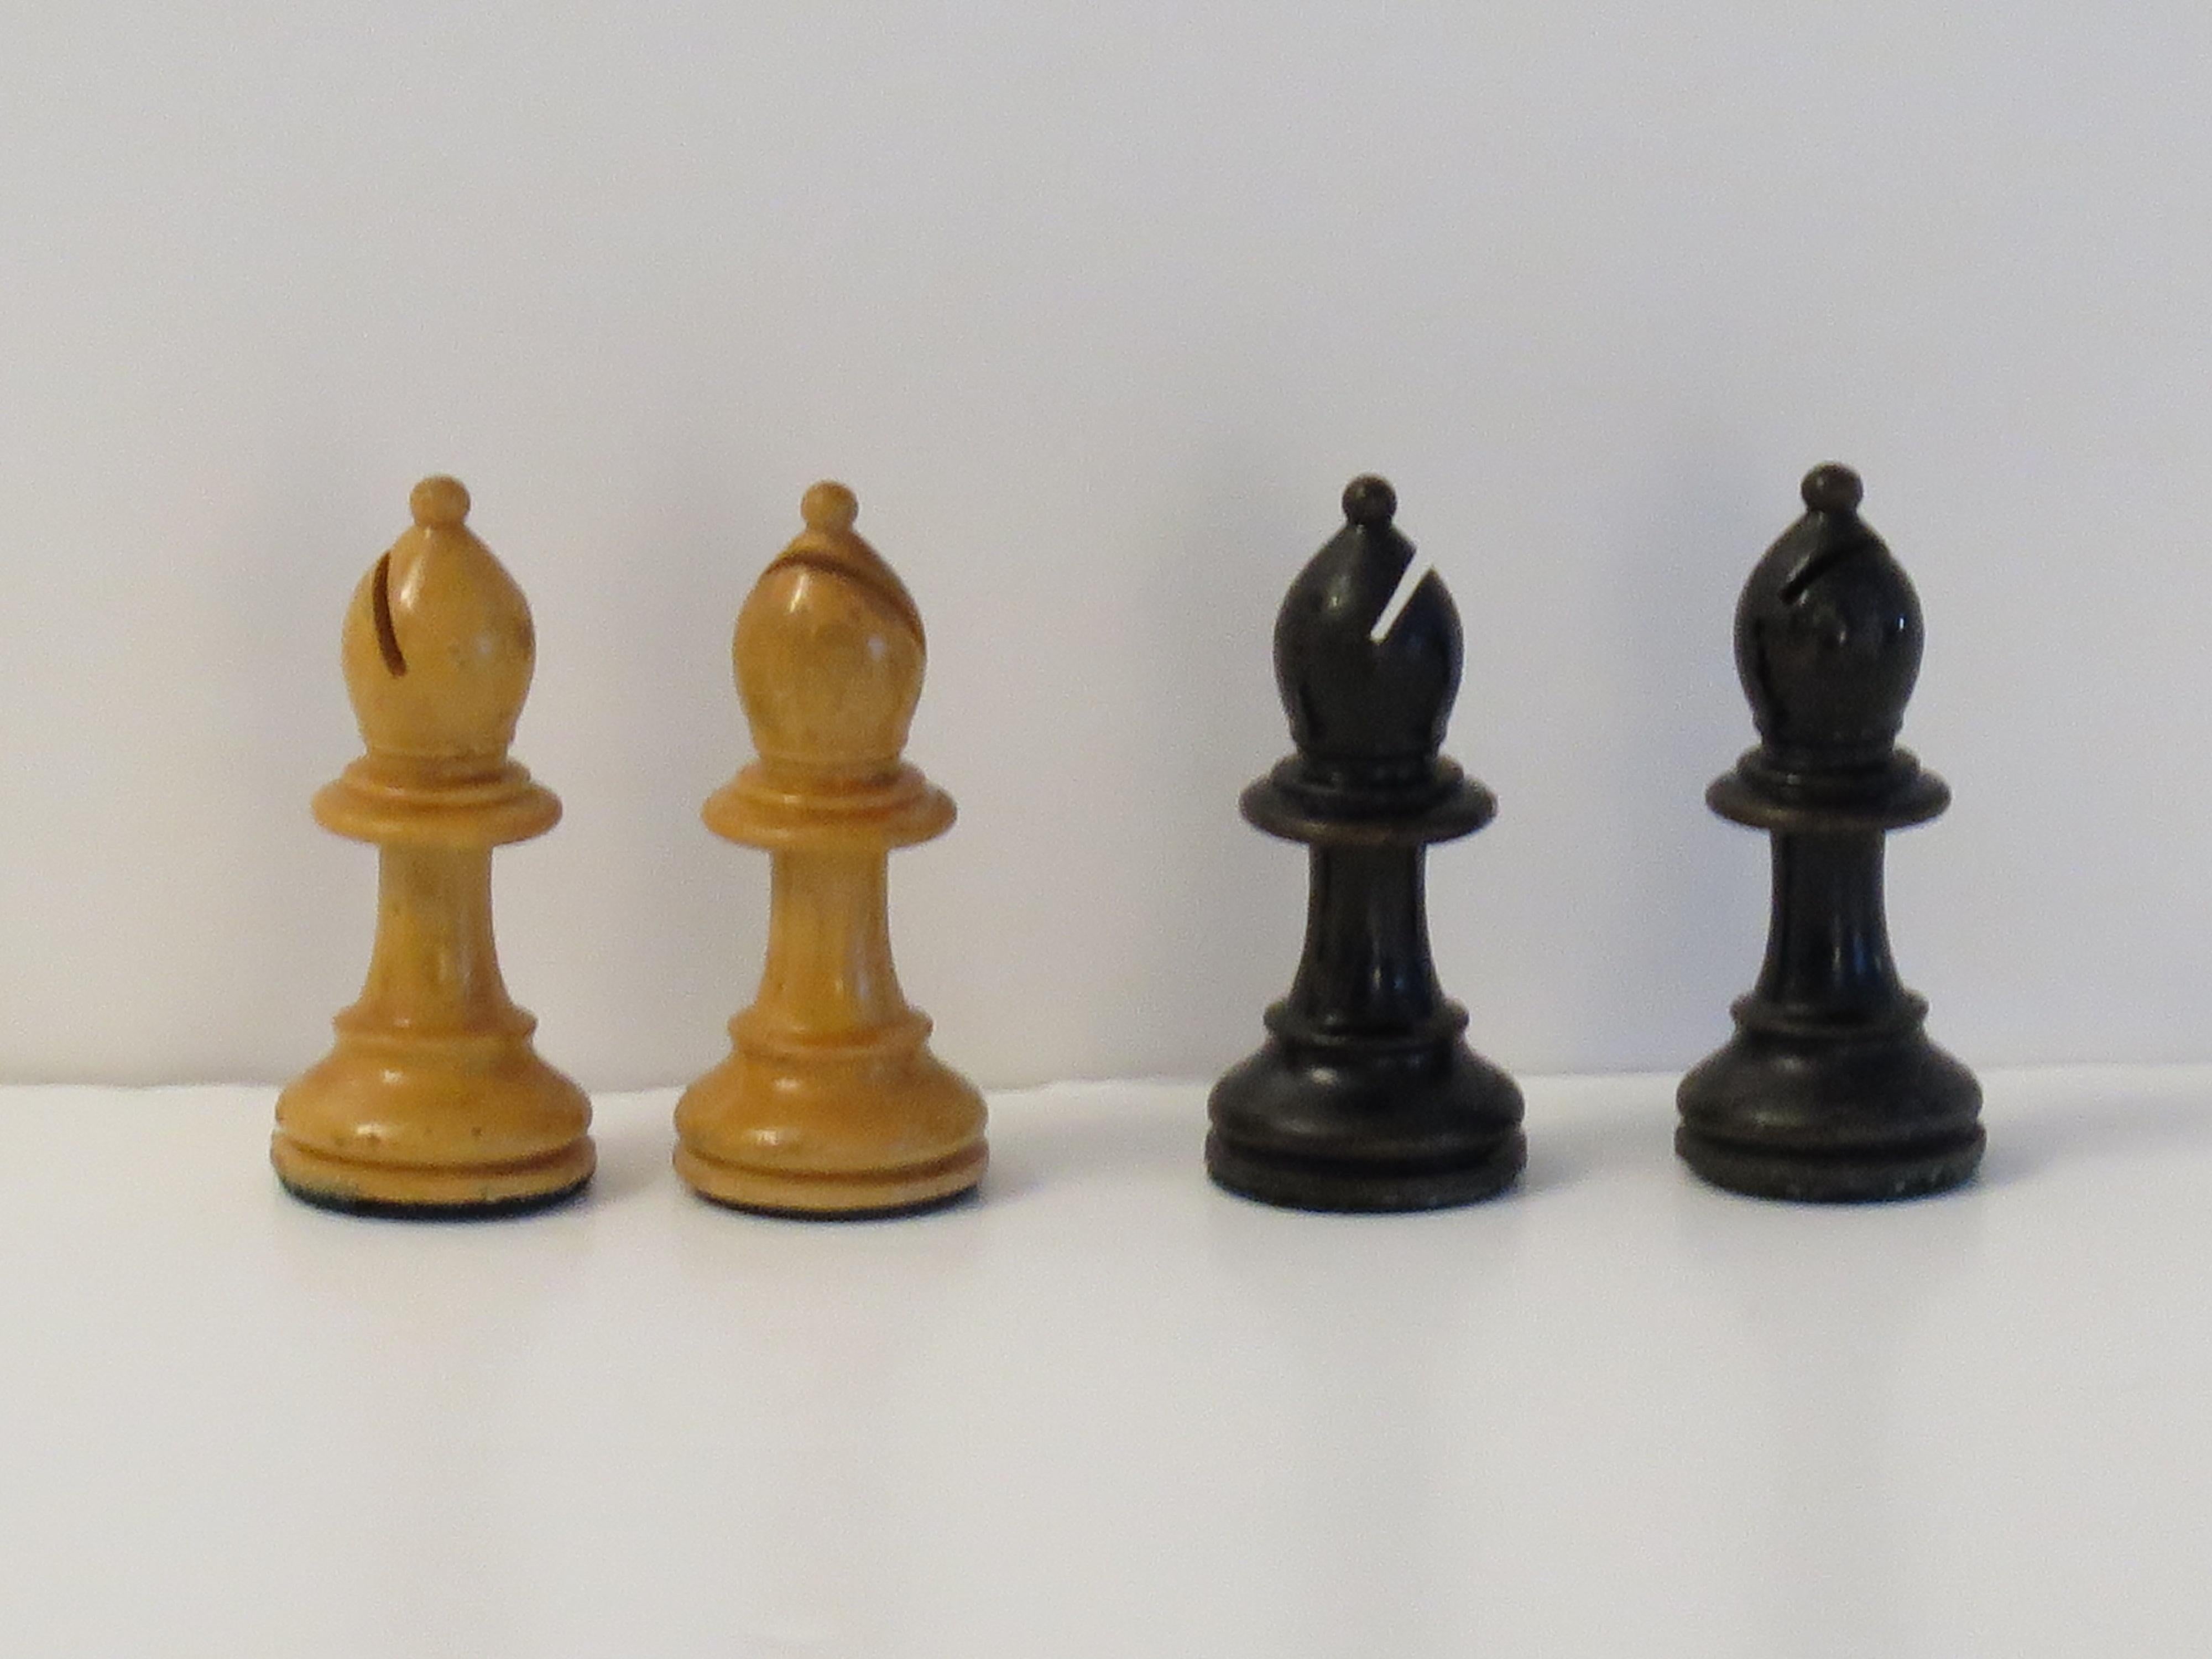 Staunton Fierce Knight Weighted Club Chesss Set 8.5cm Kings Jointed Box, 19th C en vente 2